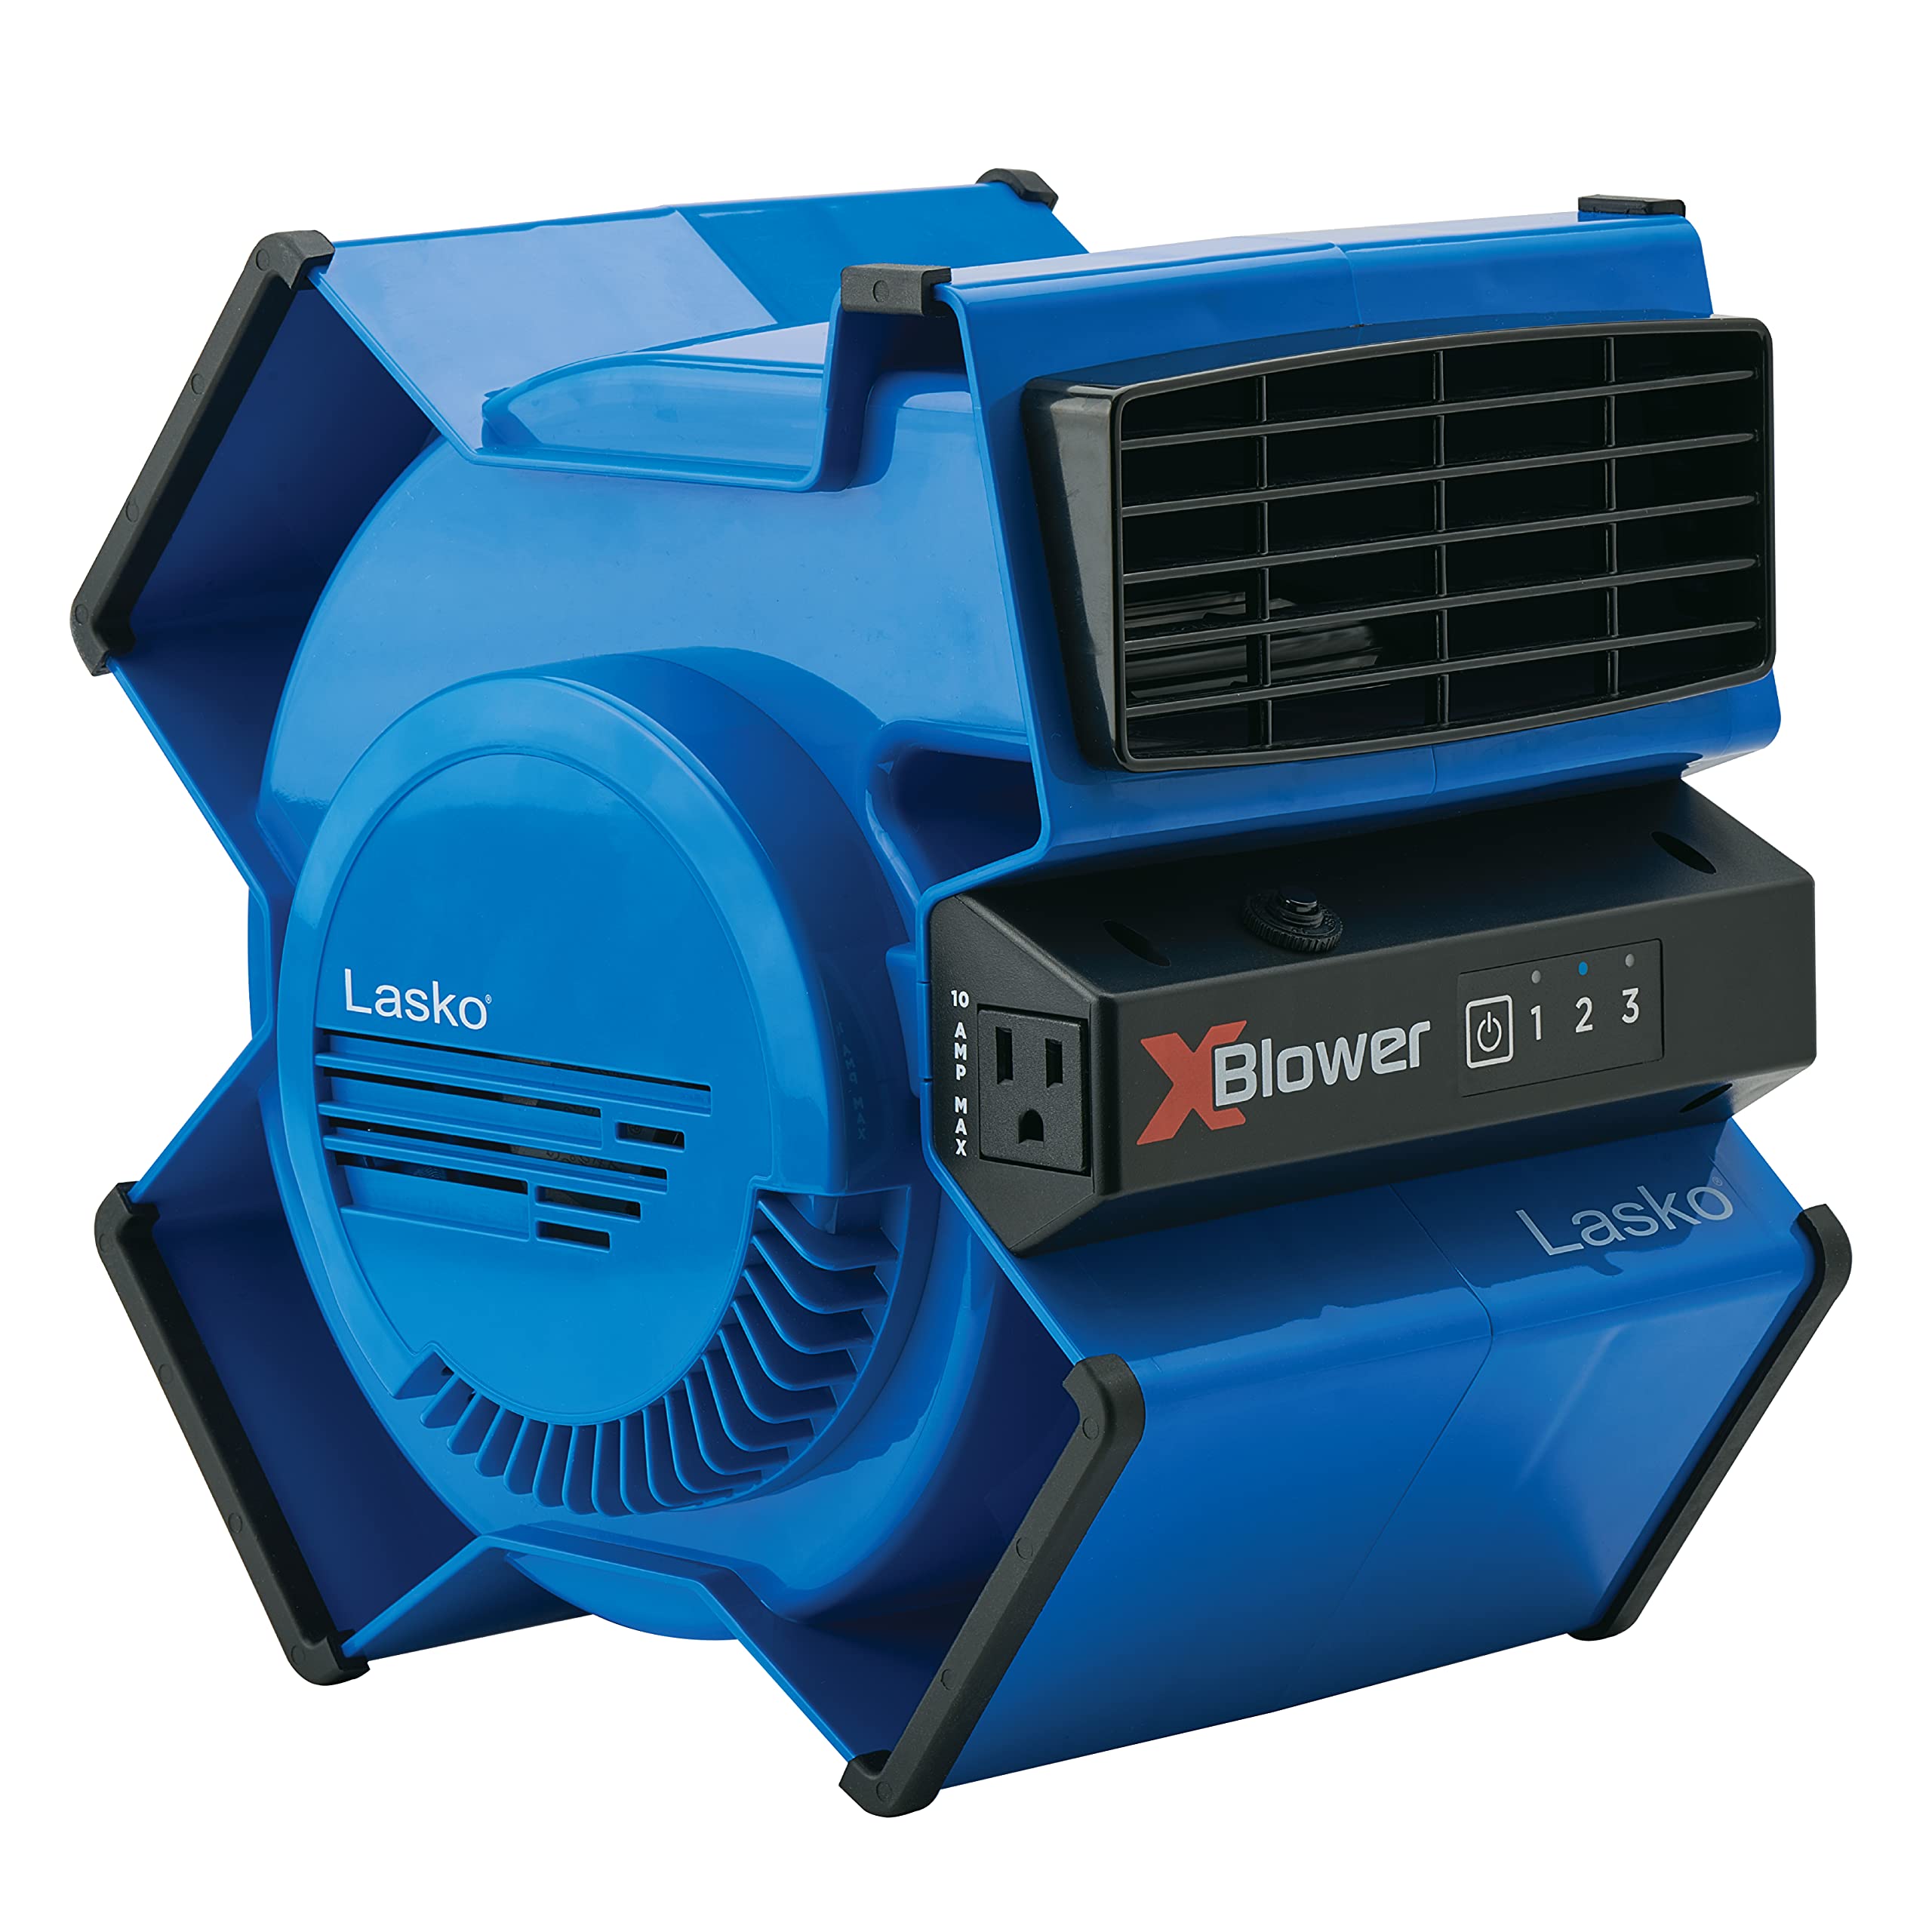 Lasko High Velocity X-Blower Air Mover Utility 3-Speed 6-Position Fan, 11x9x12, Blue & High Velocity Pro-Performance Pivoting Utility Fan for Cooling, Ventilating, Black Grey U15617